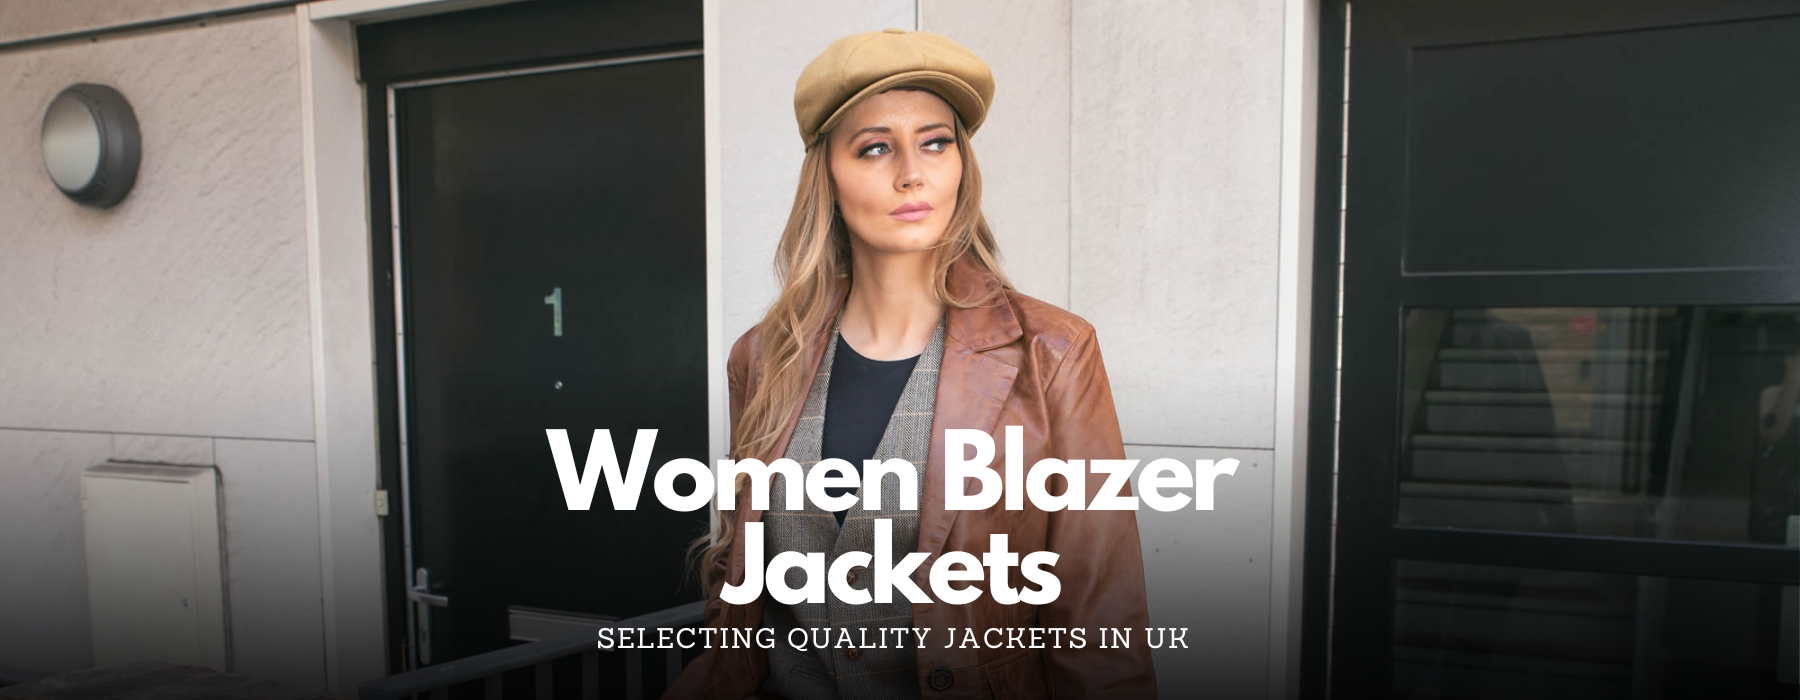 Investment Pieces: Selecting Quality Women's Blazer Jackets in UK - Upperclass Fashions 